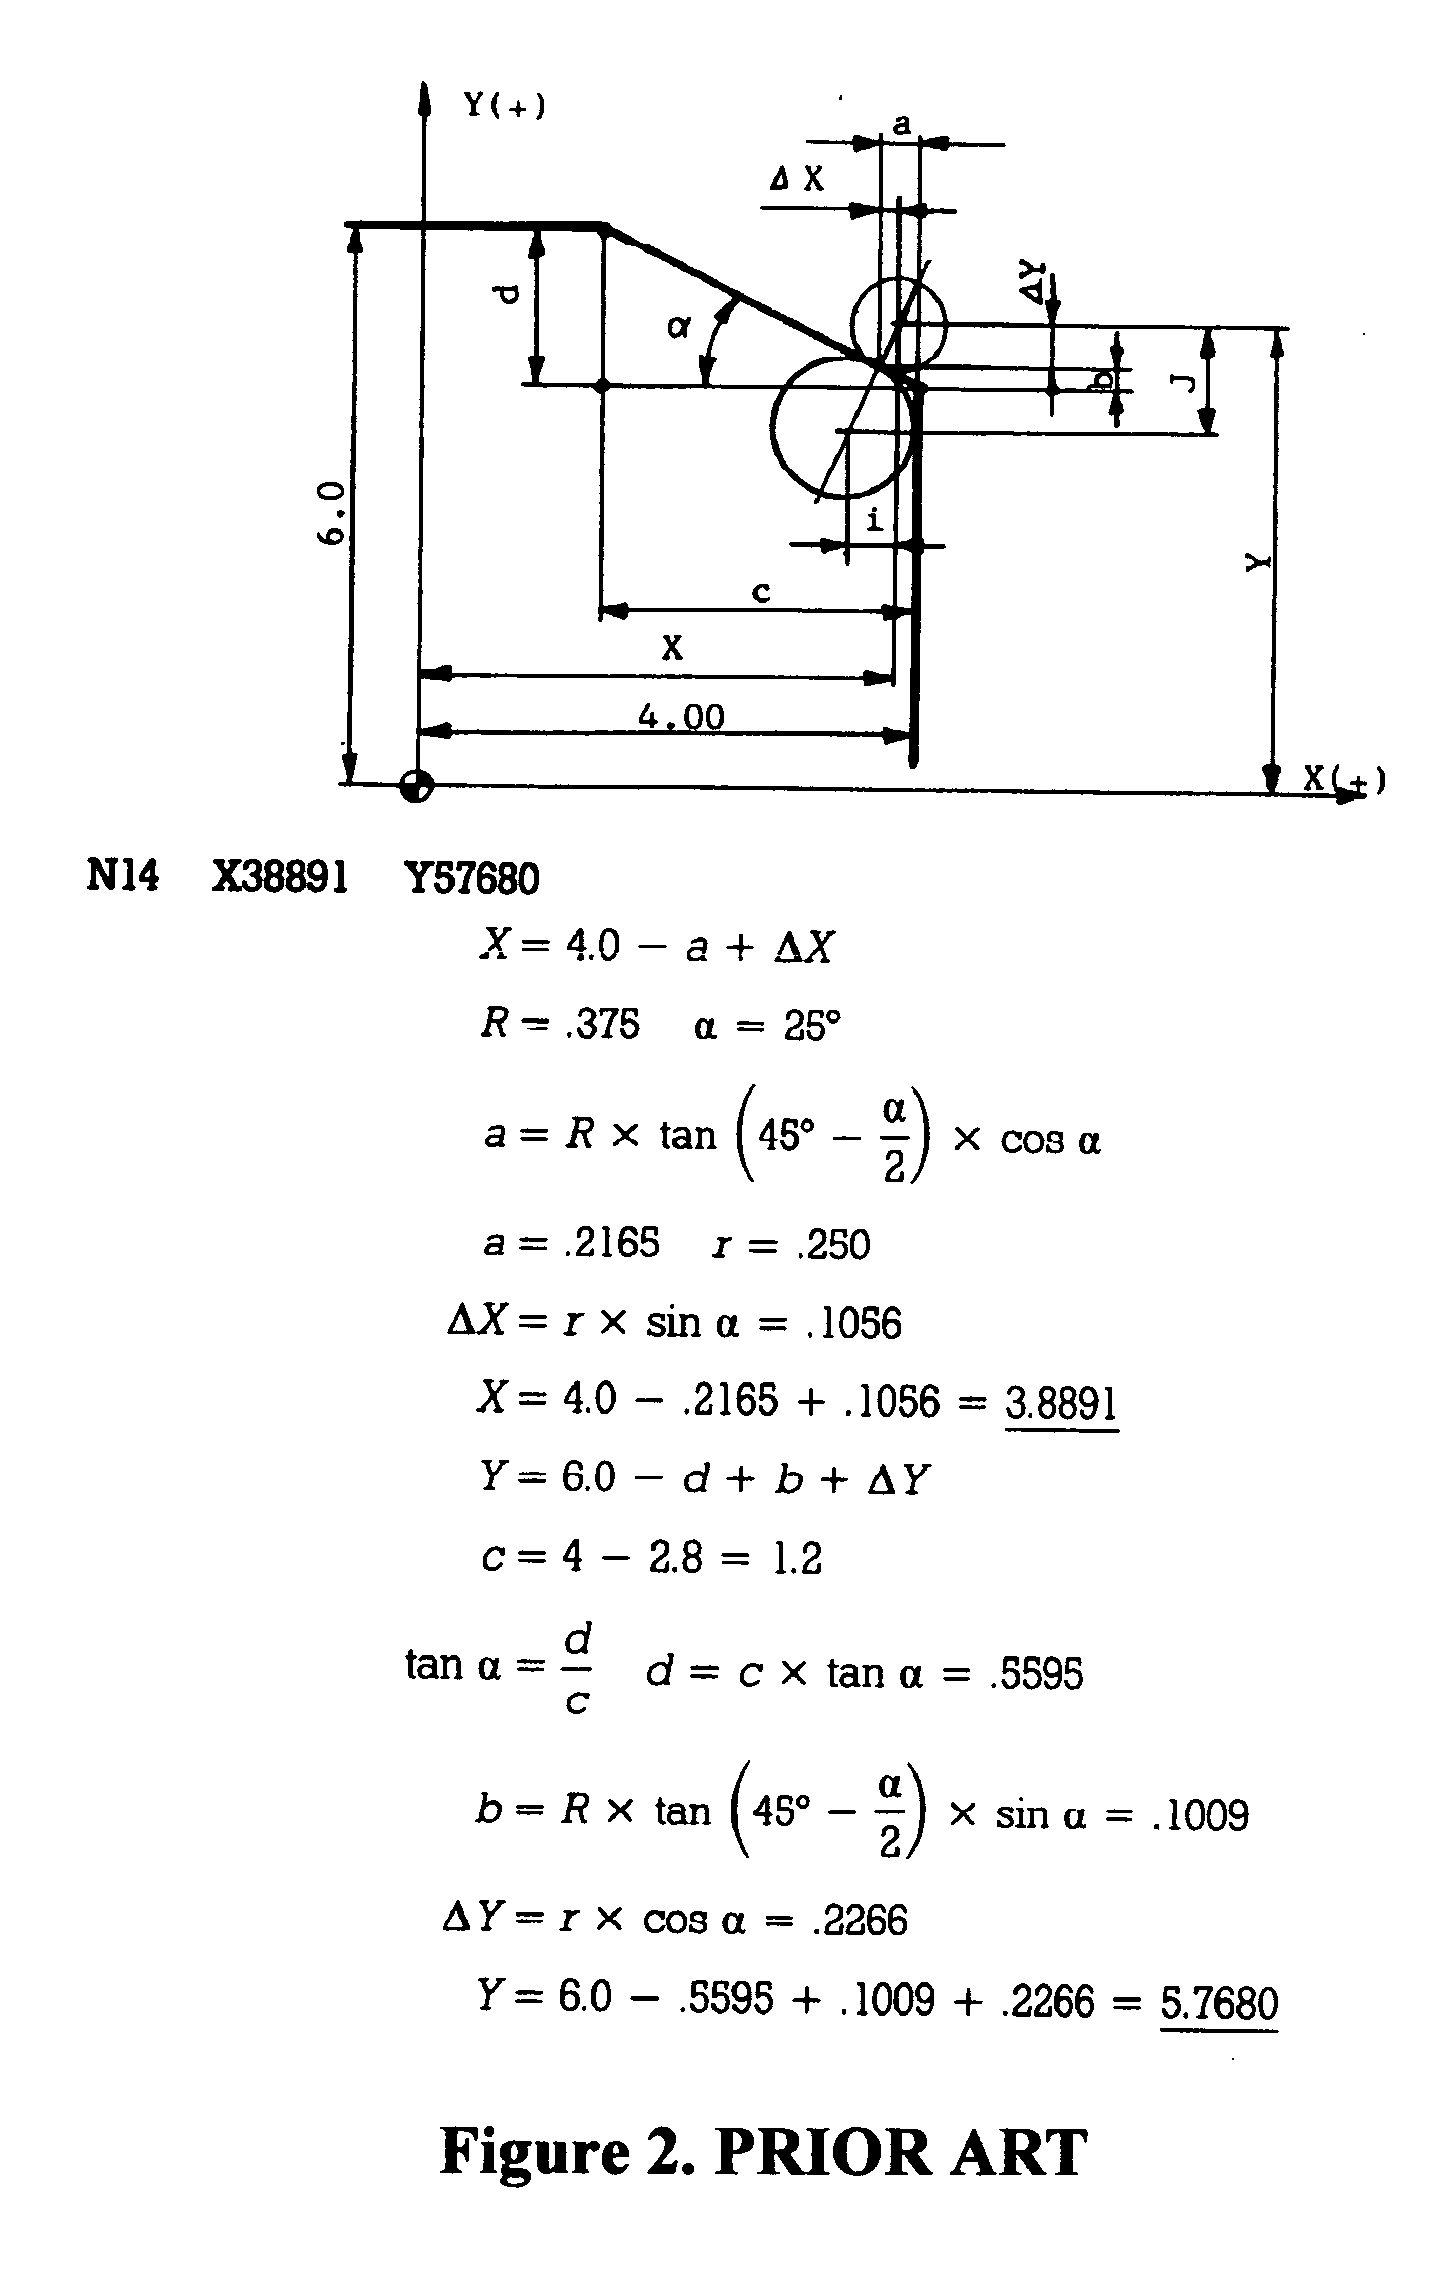 Manual CNC programming system and technique to use computer aided design systems to determine cutter location information